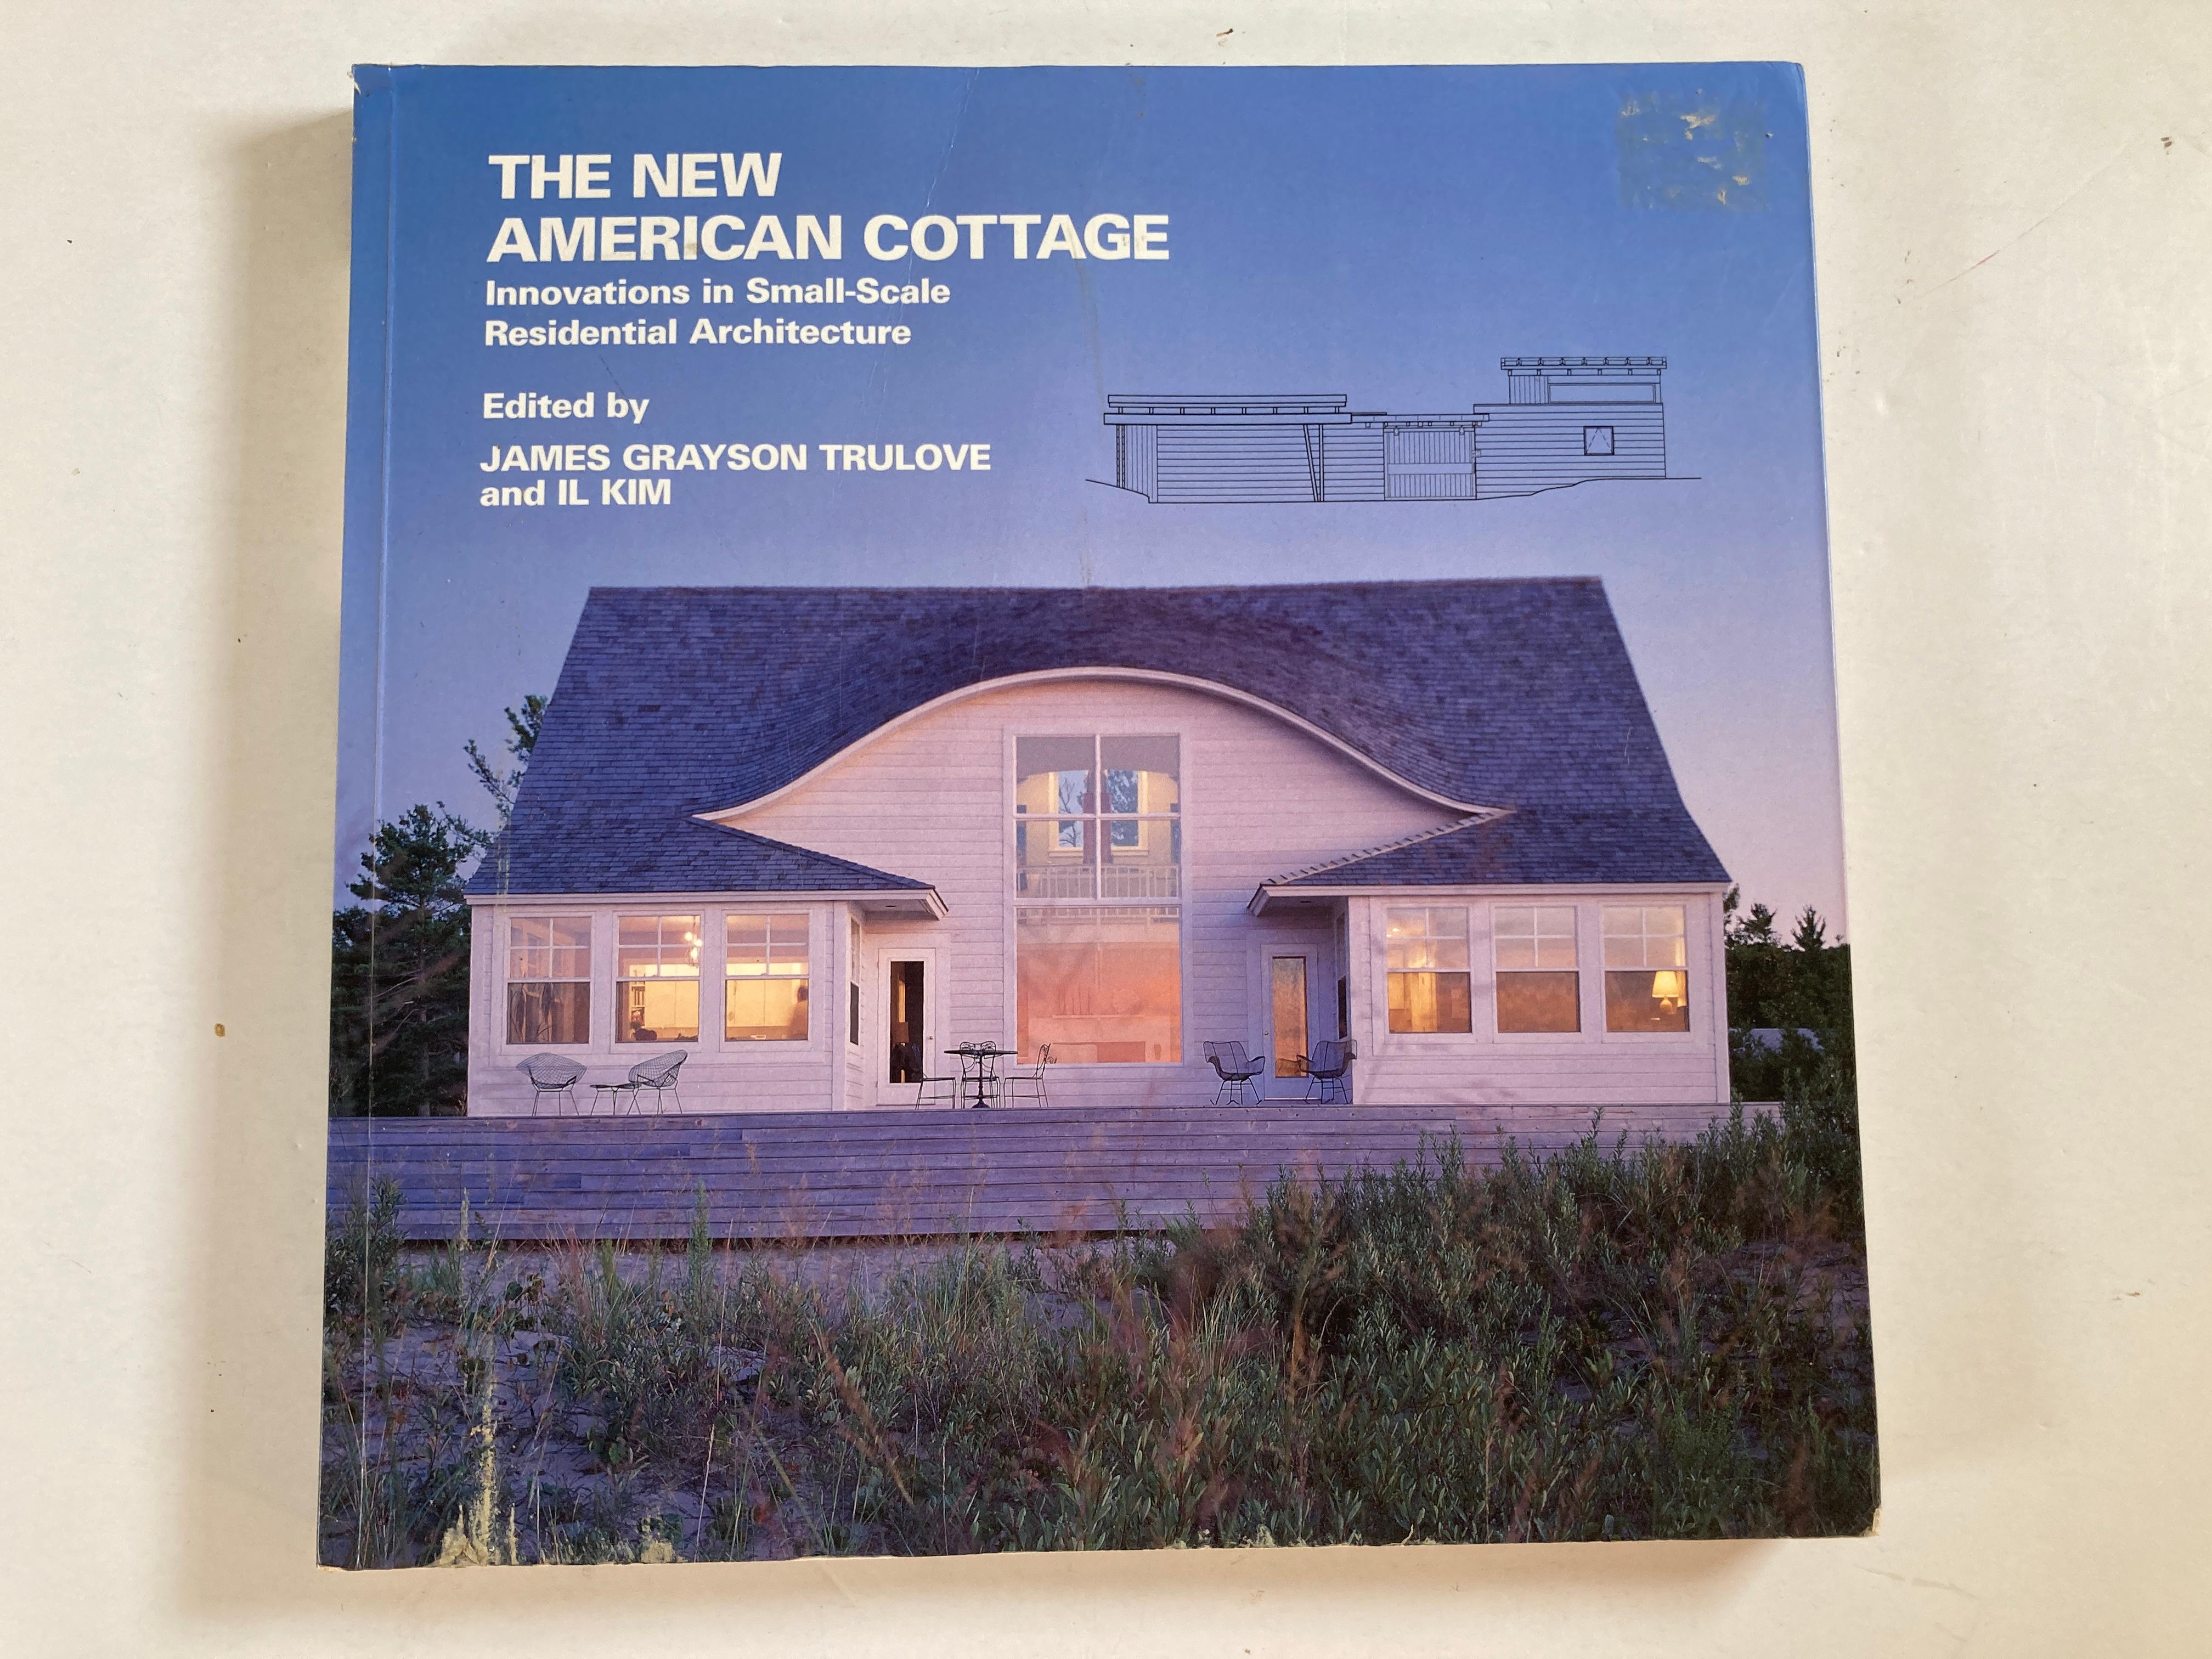 The new American cottage: Innovations in small-scale Residential Architecture (New American Architecture)
Synopsis:
Small-scale architectural masterpieces are showcased in this beautifully illustrated, meticulously documented book devoted to some of